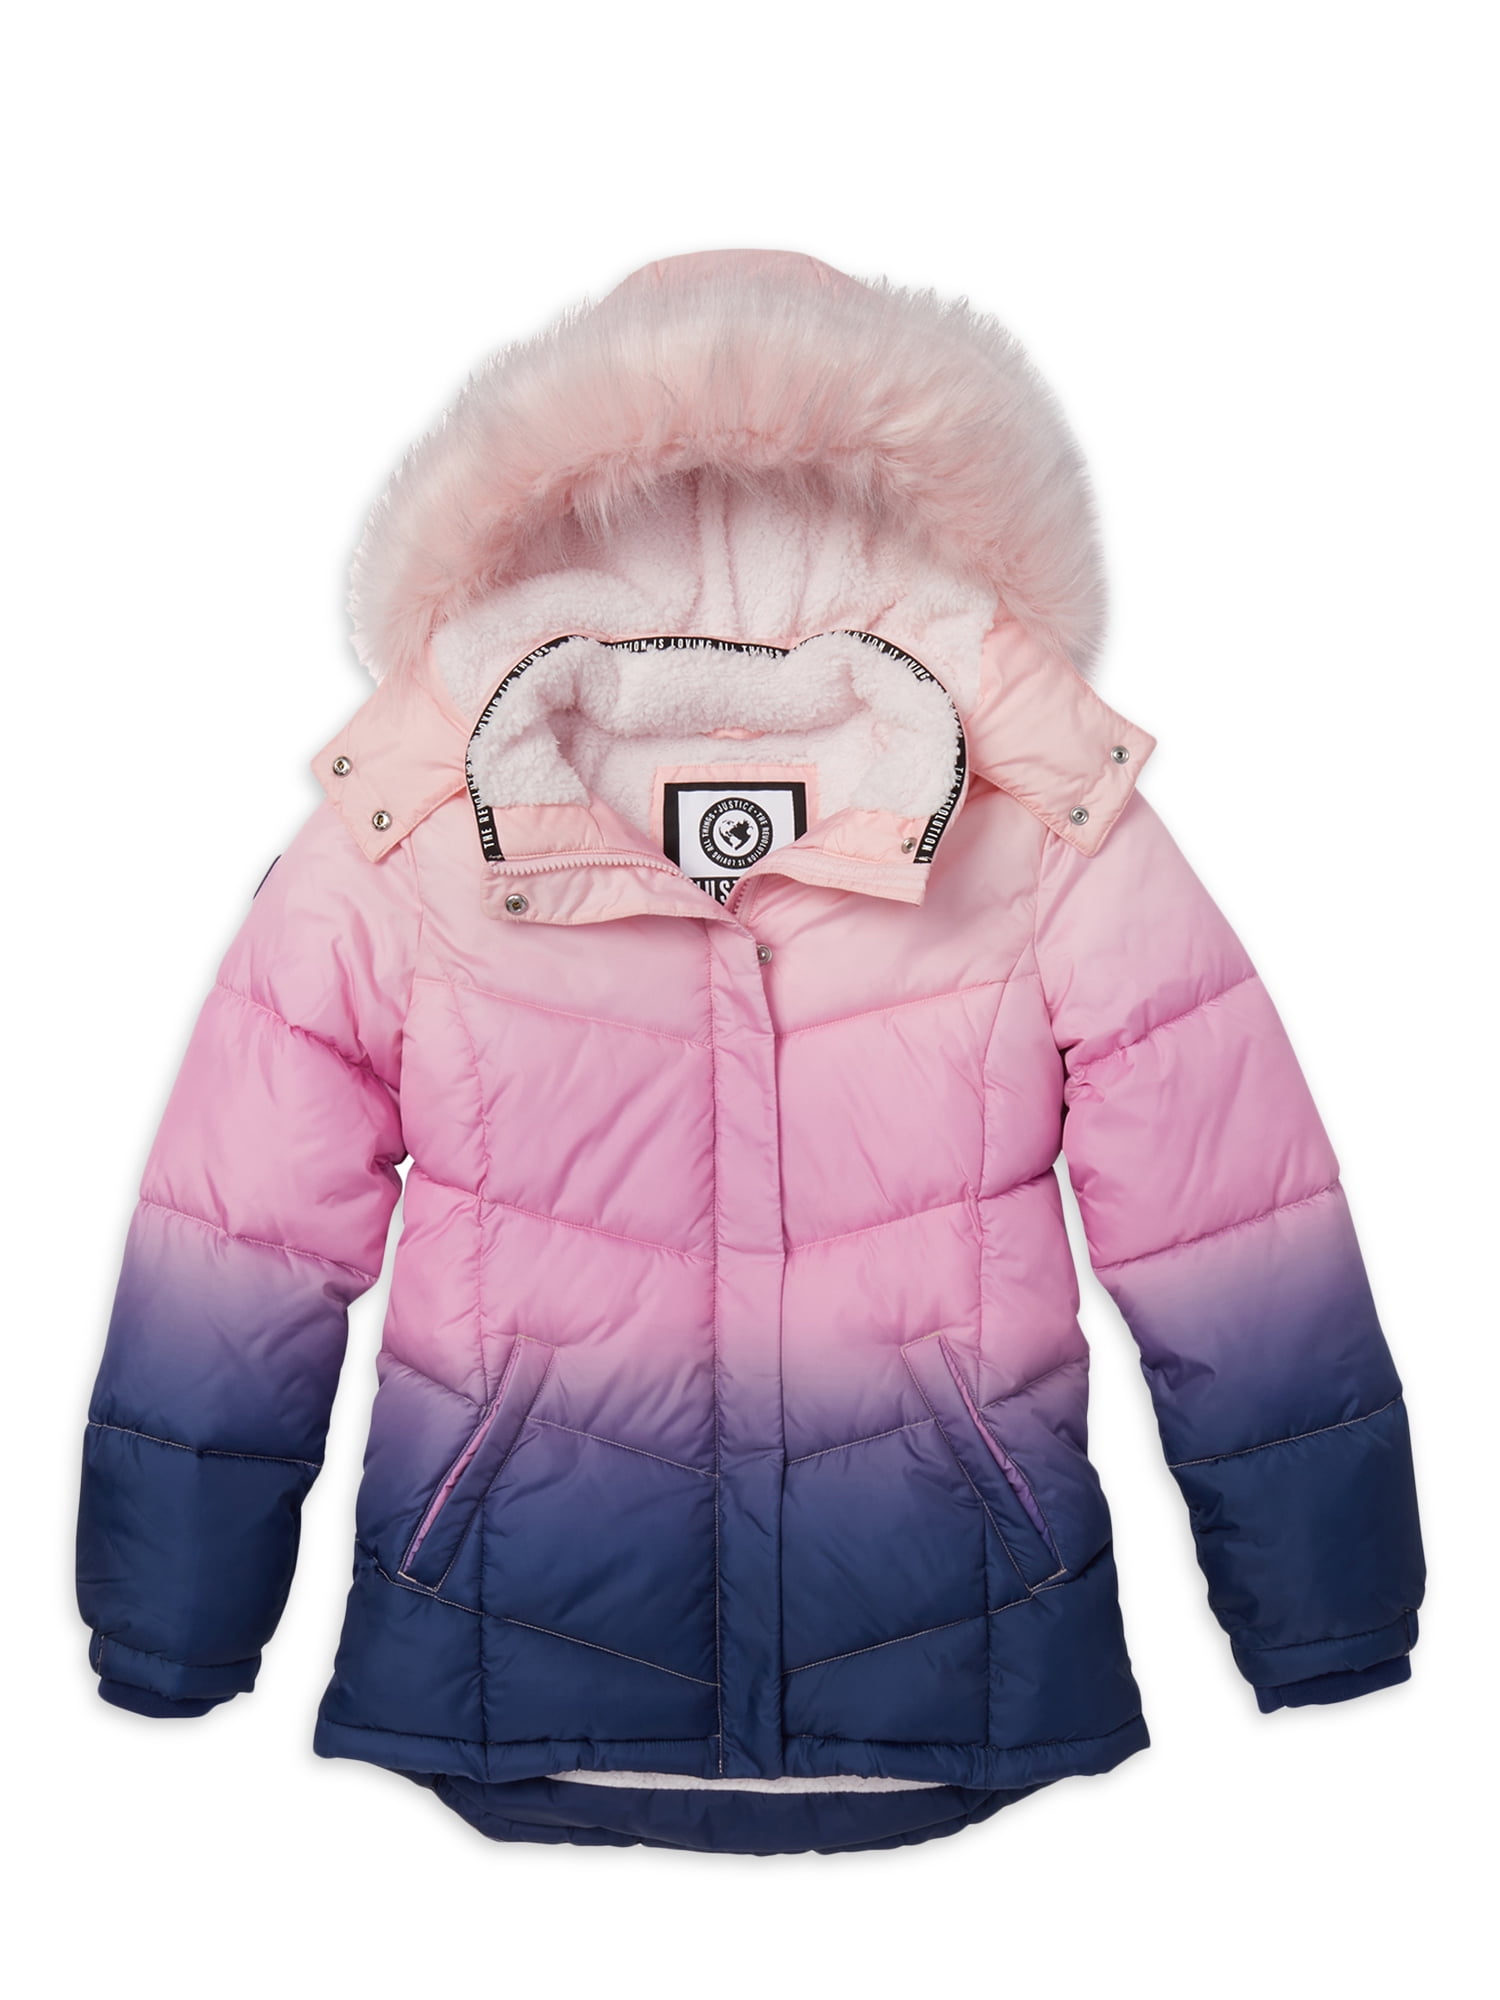 Gorgeous Girls Pink Puffy Coat with Detachable Faux Fur Trim On Hood Cozy Soft 